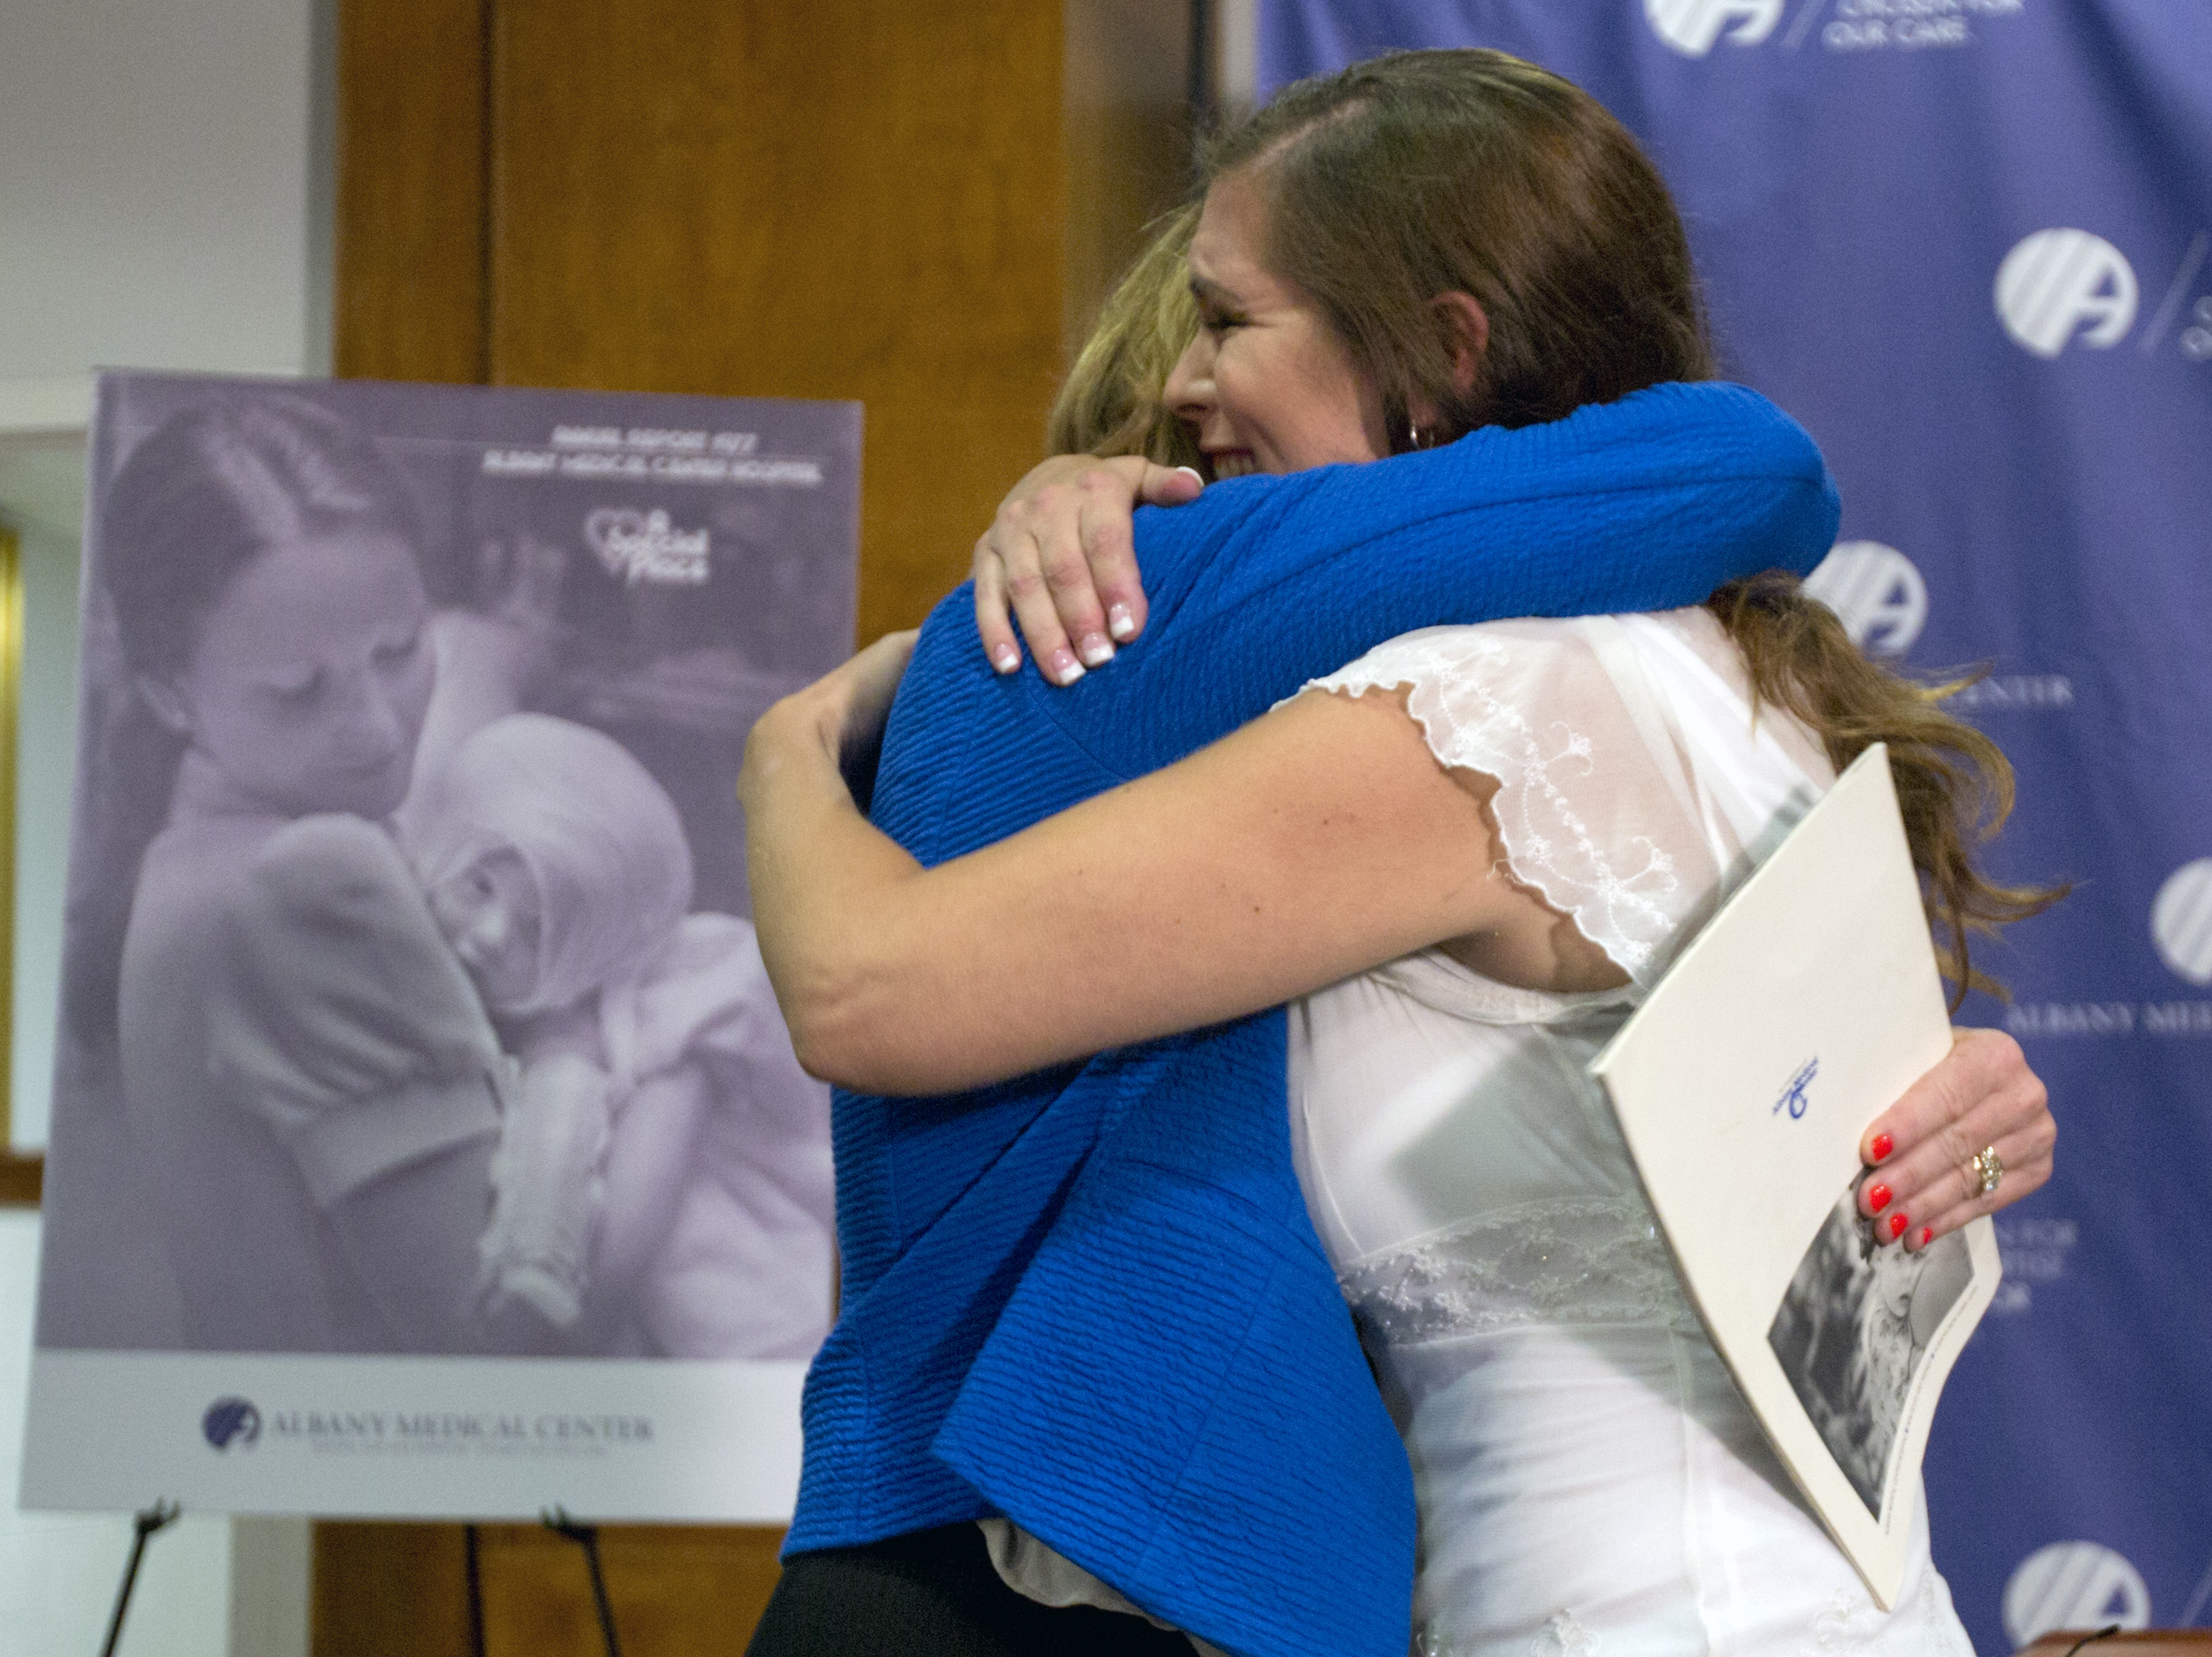 Nurse Susan Berger, left, and Amanda Scarpinati hug during a news conference at Albany Medical Center, Tuesday, Sept. 29, 2015, in Albany, N.Y. Scarpinati, who suffered severe burns as an infant, is finally getting the chance to thank Berger who cared for her, thanks to a social media posting that revealed the identity of the nurse in 38-year-old photos. (AP Photo/Mike Groll)